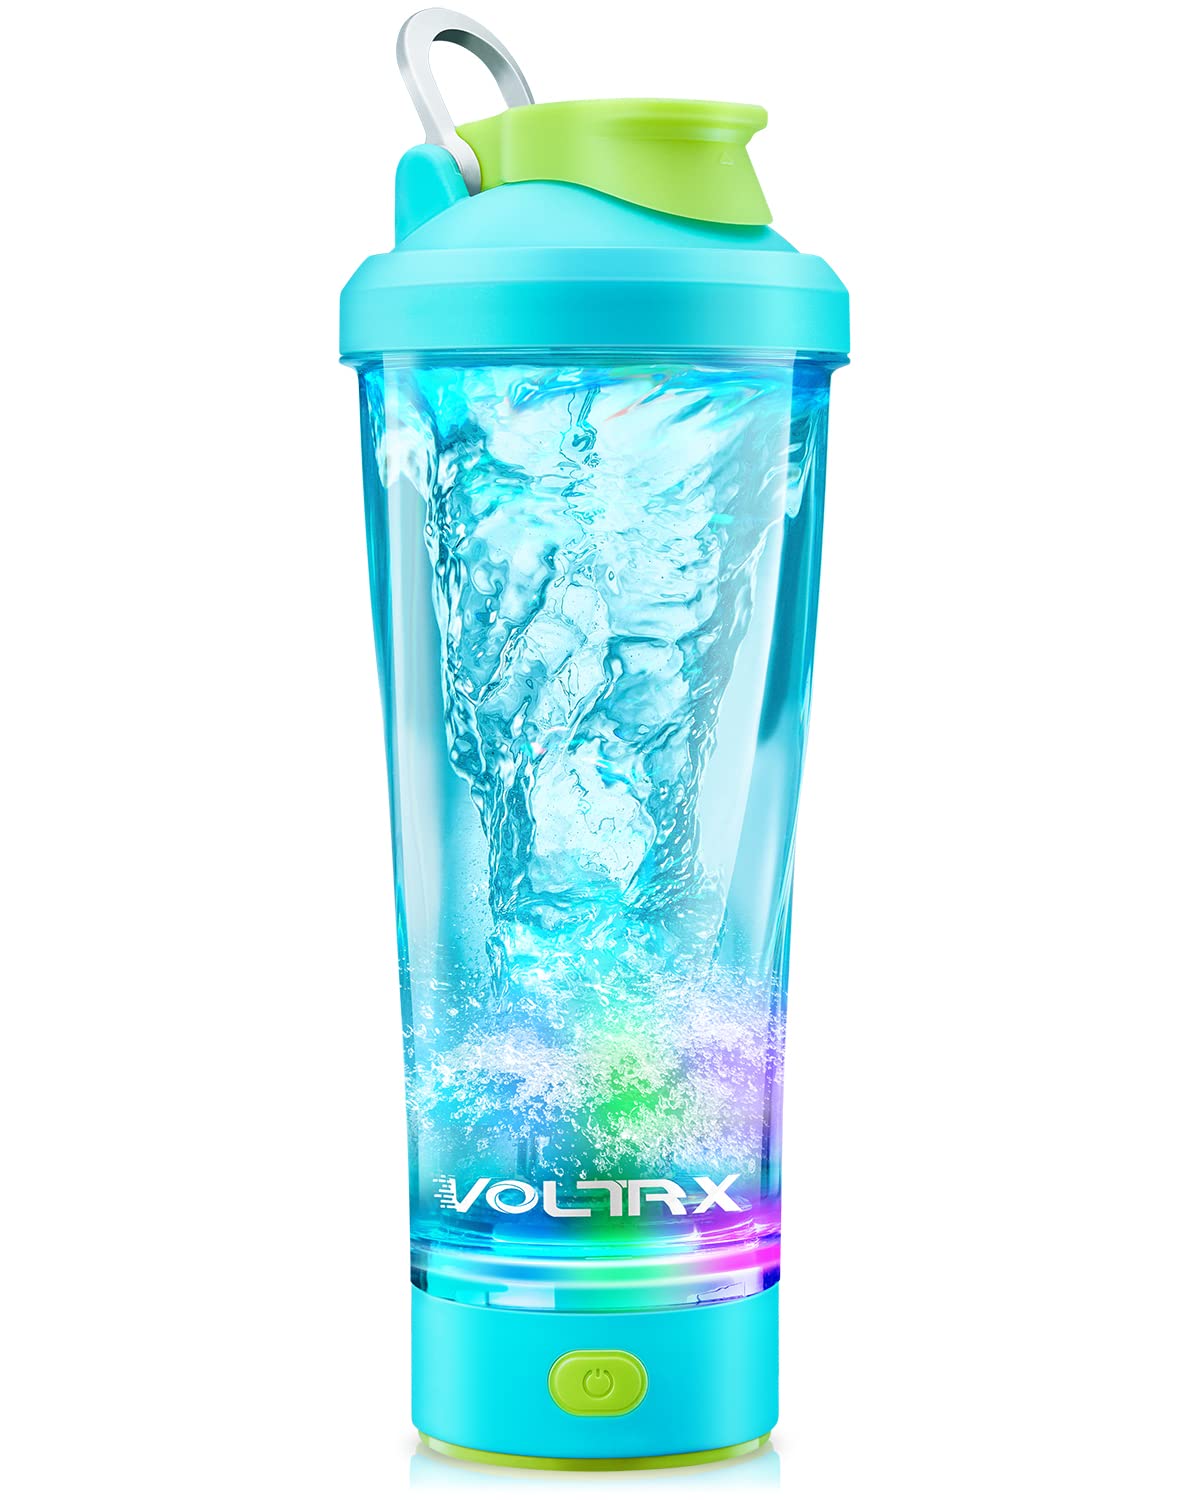 VOLTRX Electric Shaker Bottle-VortexBoost USB C Rechargeable Protein Shake Mixer, Shaker Cups for Protein Shakes and Meal Replacement Shakes, BPA Free, Waterproof,Colored Light Base,600ml,Aurora green